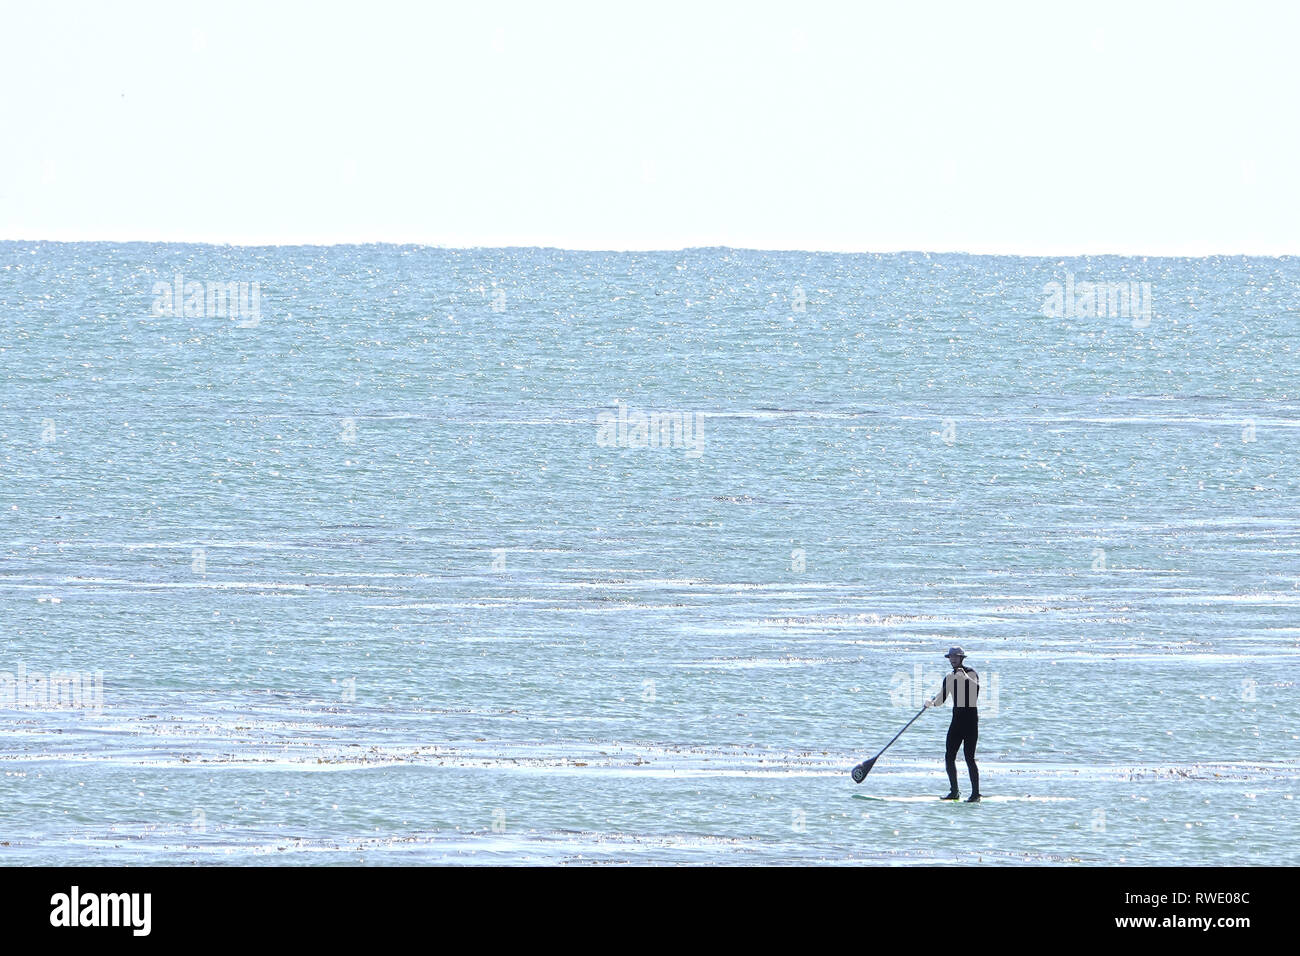 20th February, 2019 Capitola, CA, USA   Paddle surfer strokes is board on calm Pacific Ocean off Capitola, California USA Stock Photo